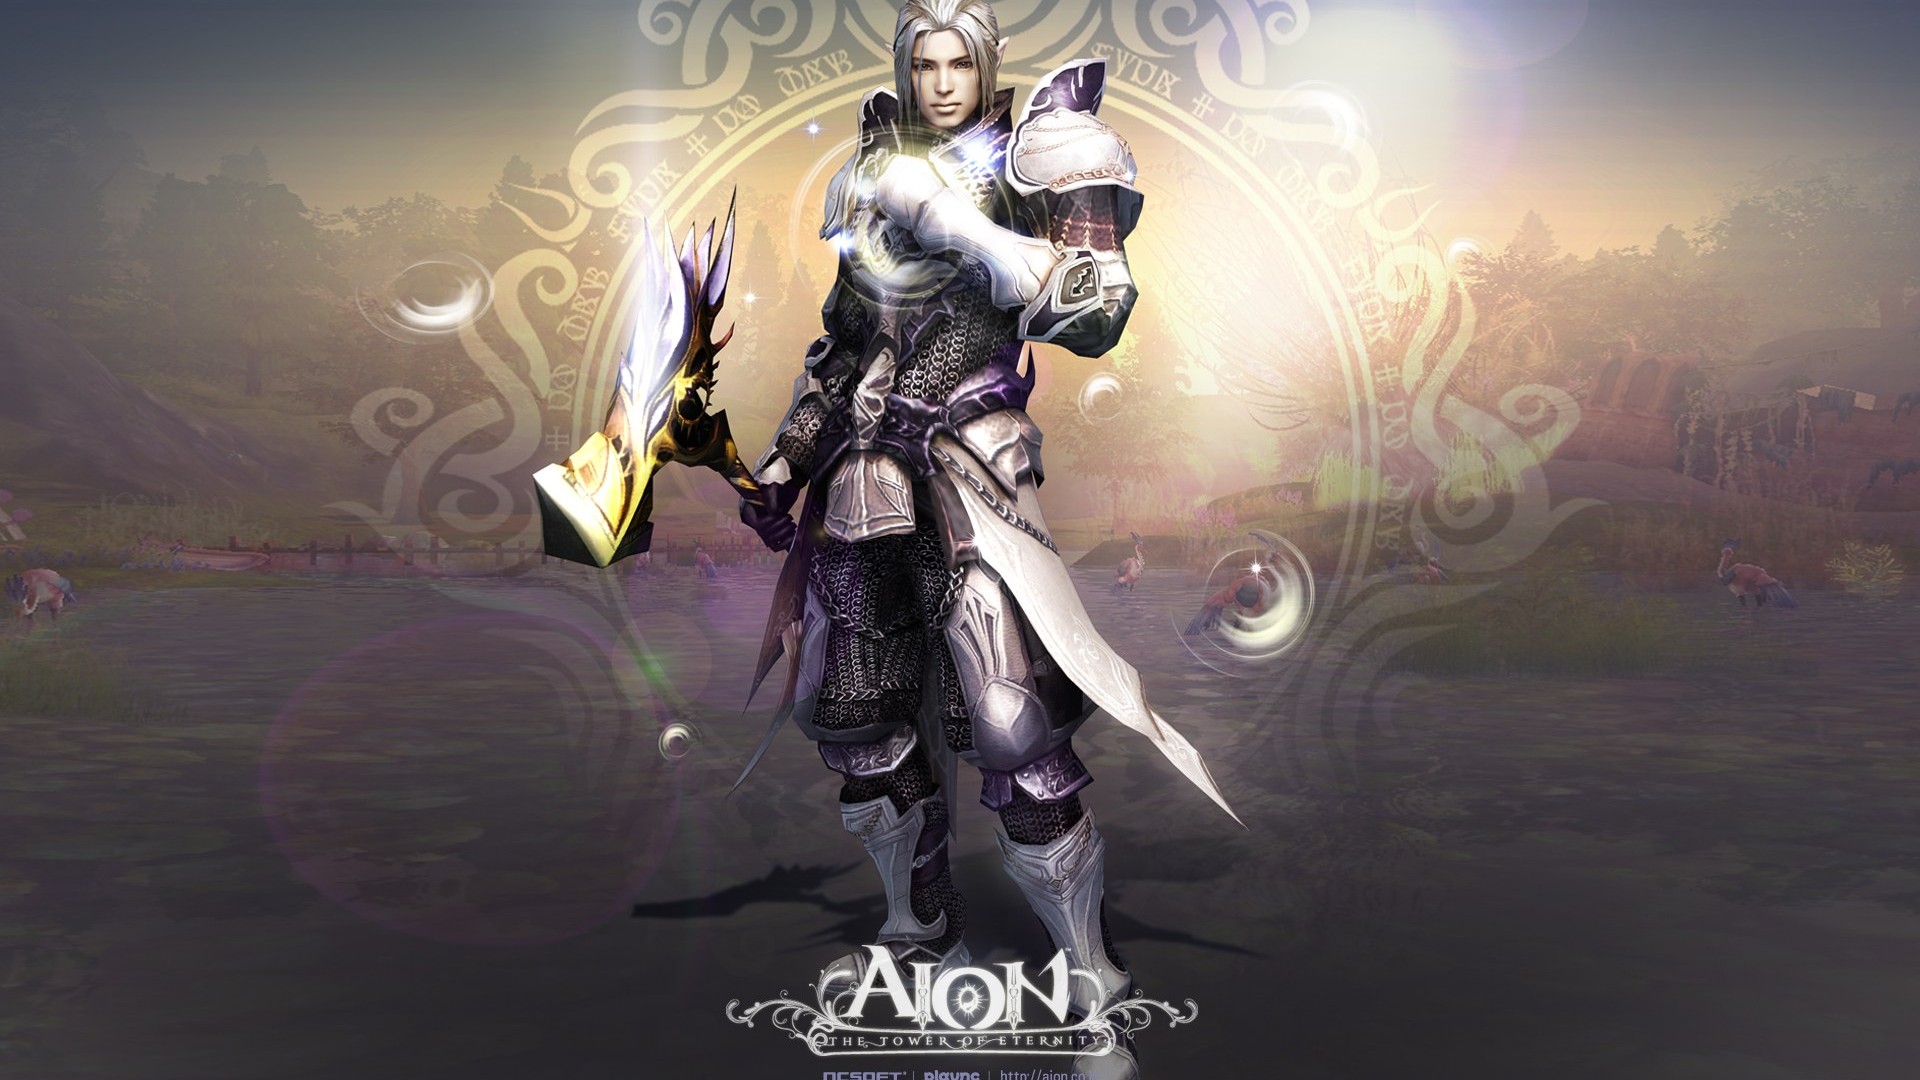 Aion modeling HD gaming wallpapers #4 - 1920x1080